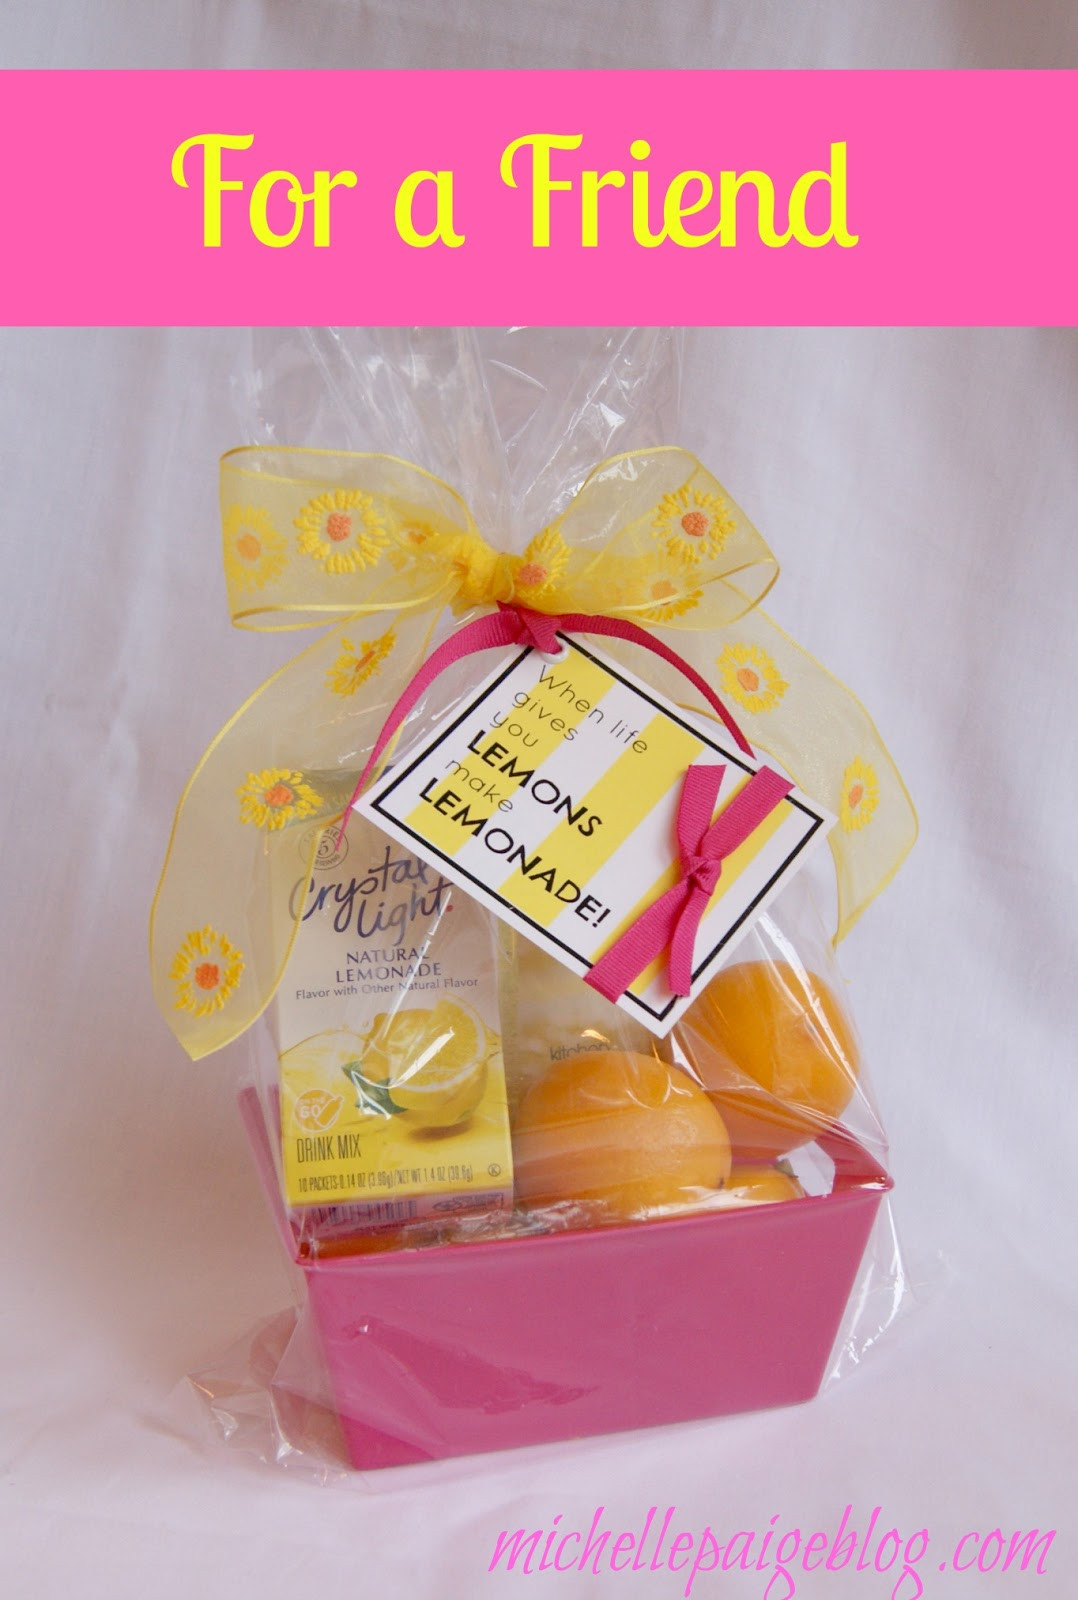 Best ideas about Gift Ideas To Cheer Up A Friend
. Save or Pin michelle paige blogs Cheer Up Gifts Lemons to Lemonade Now.